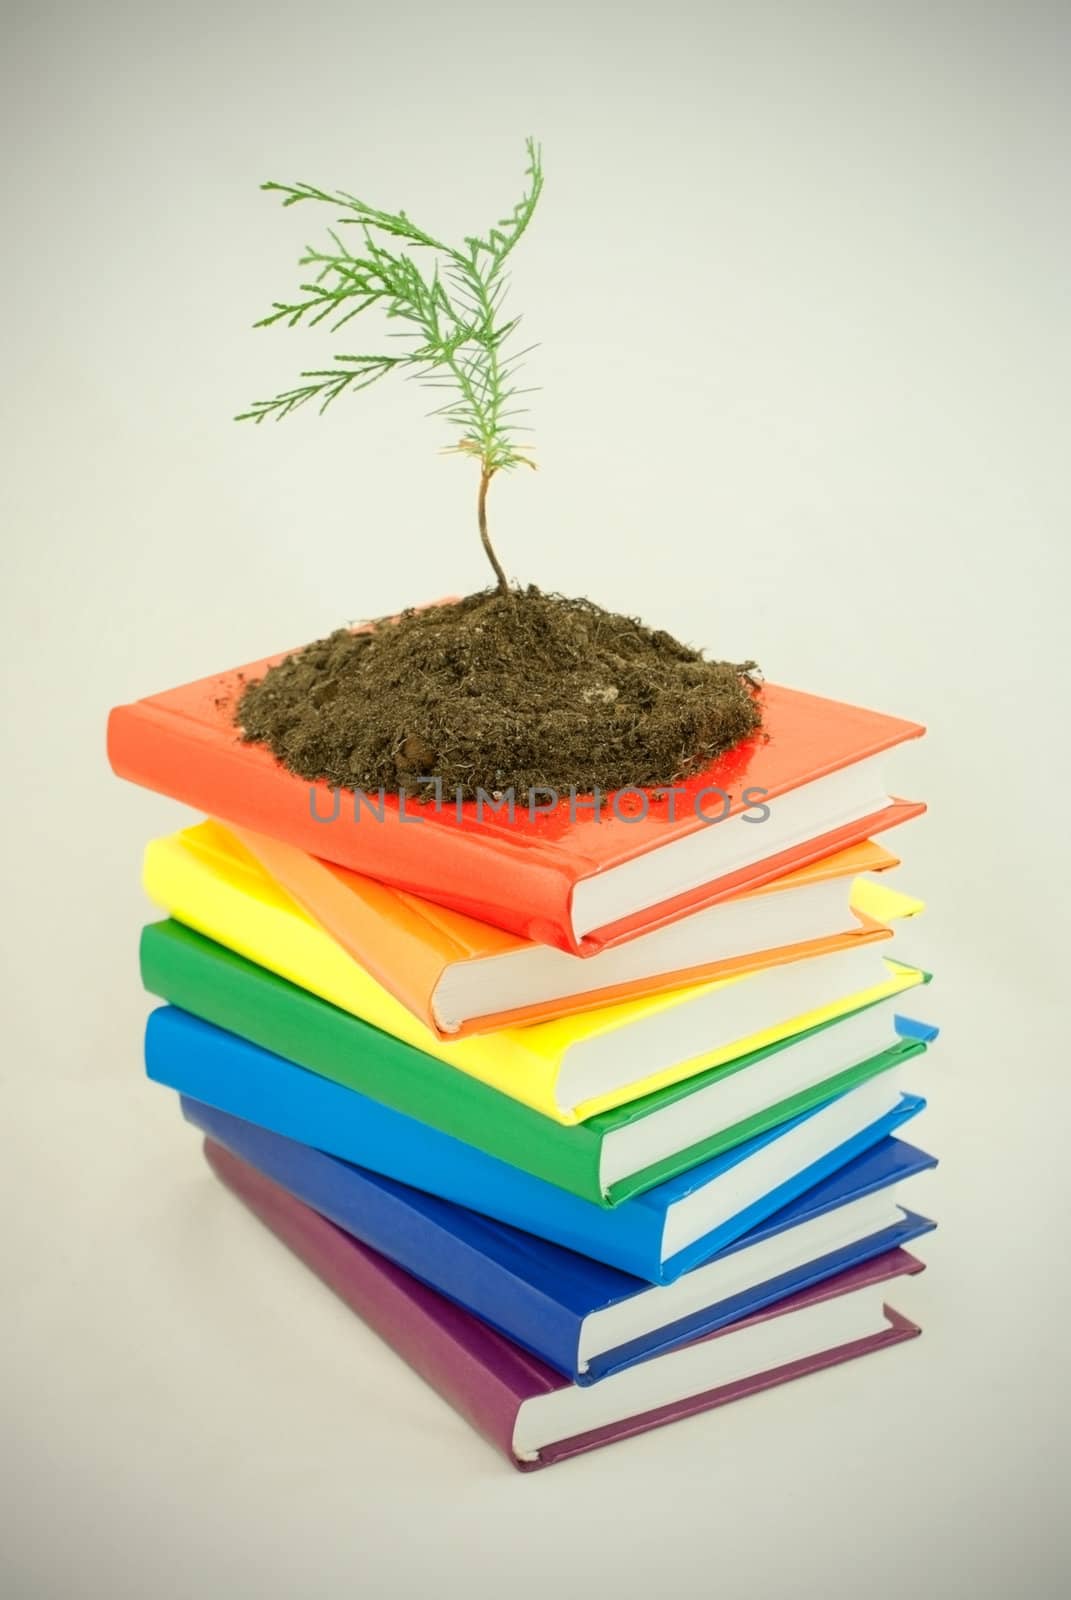 Tree seedling on the stack of colorful books